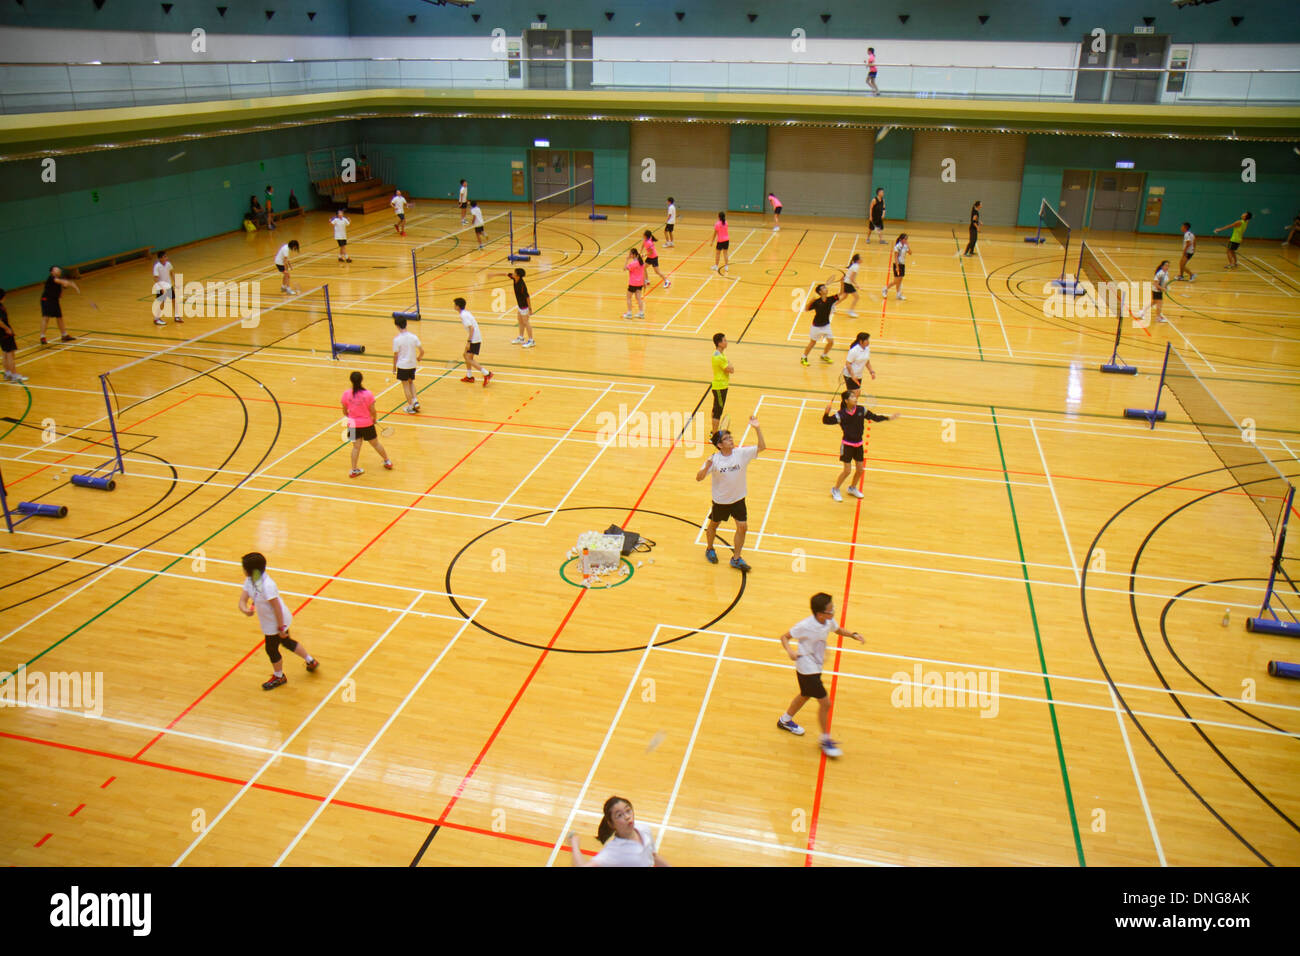 Hong Kong China,HK,Asia,Chinese,Oriental,Island,Central,Hong Kong Park Sports Centre,center,badminton courts,indoor,gymnasium,Asian girl girls,youngst Stock Photo